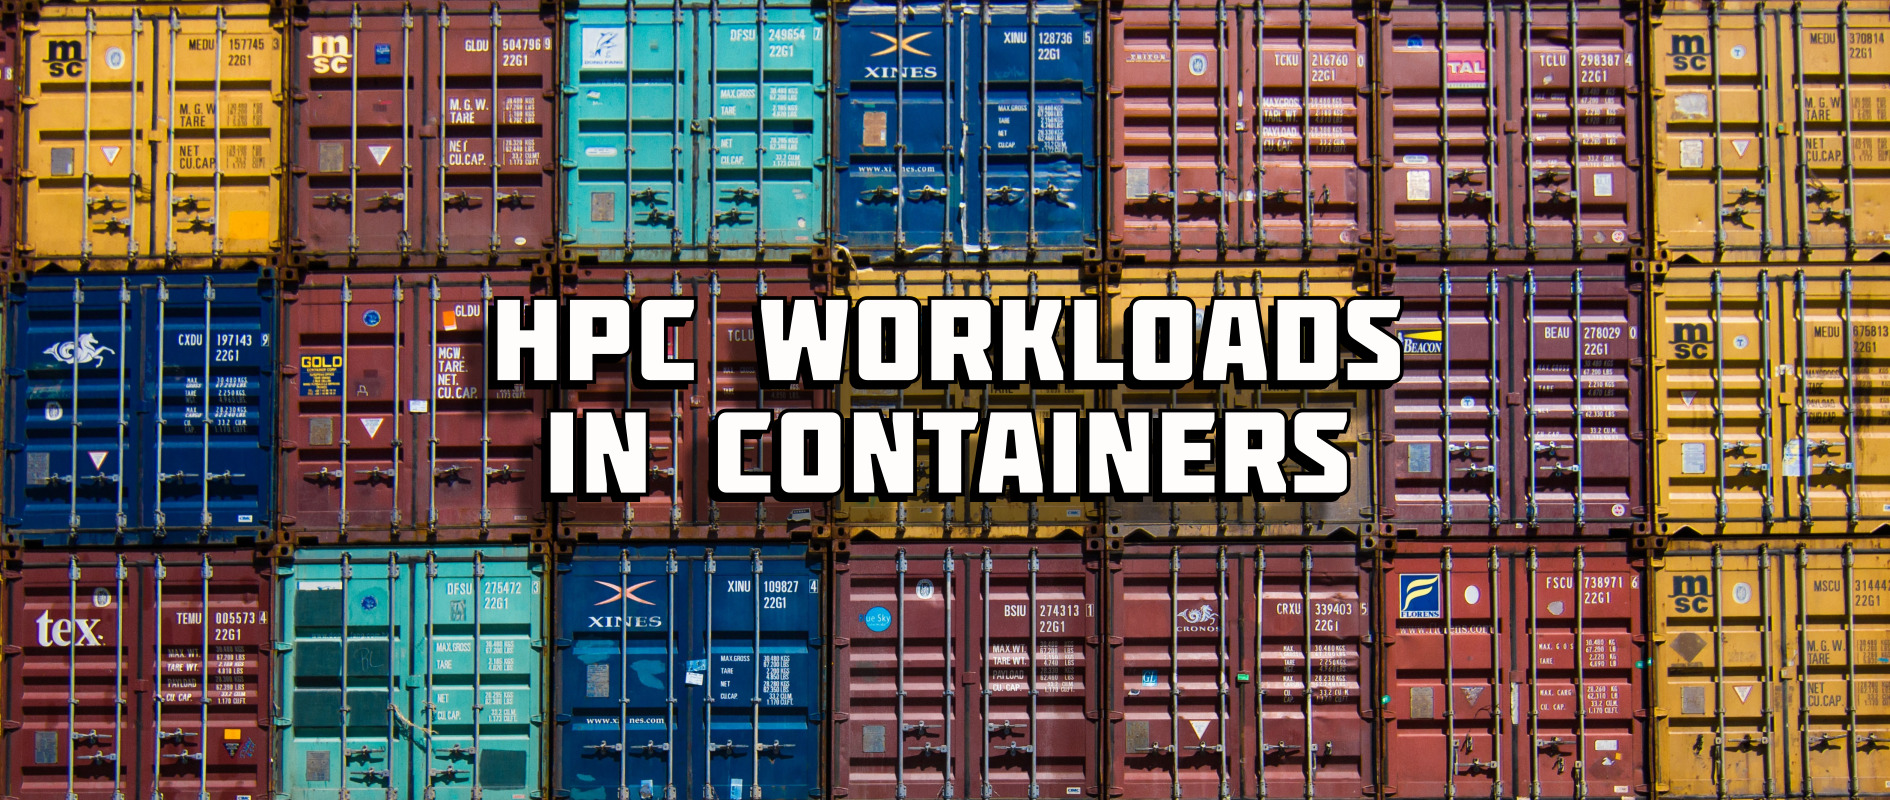 Multiple rows of shipping containers, with overlay text "HPC workloads in containers".